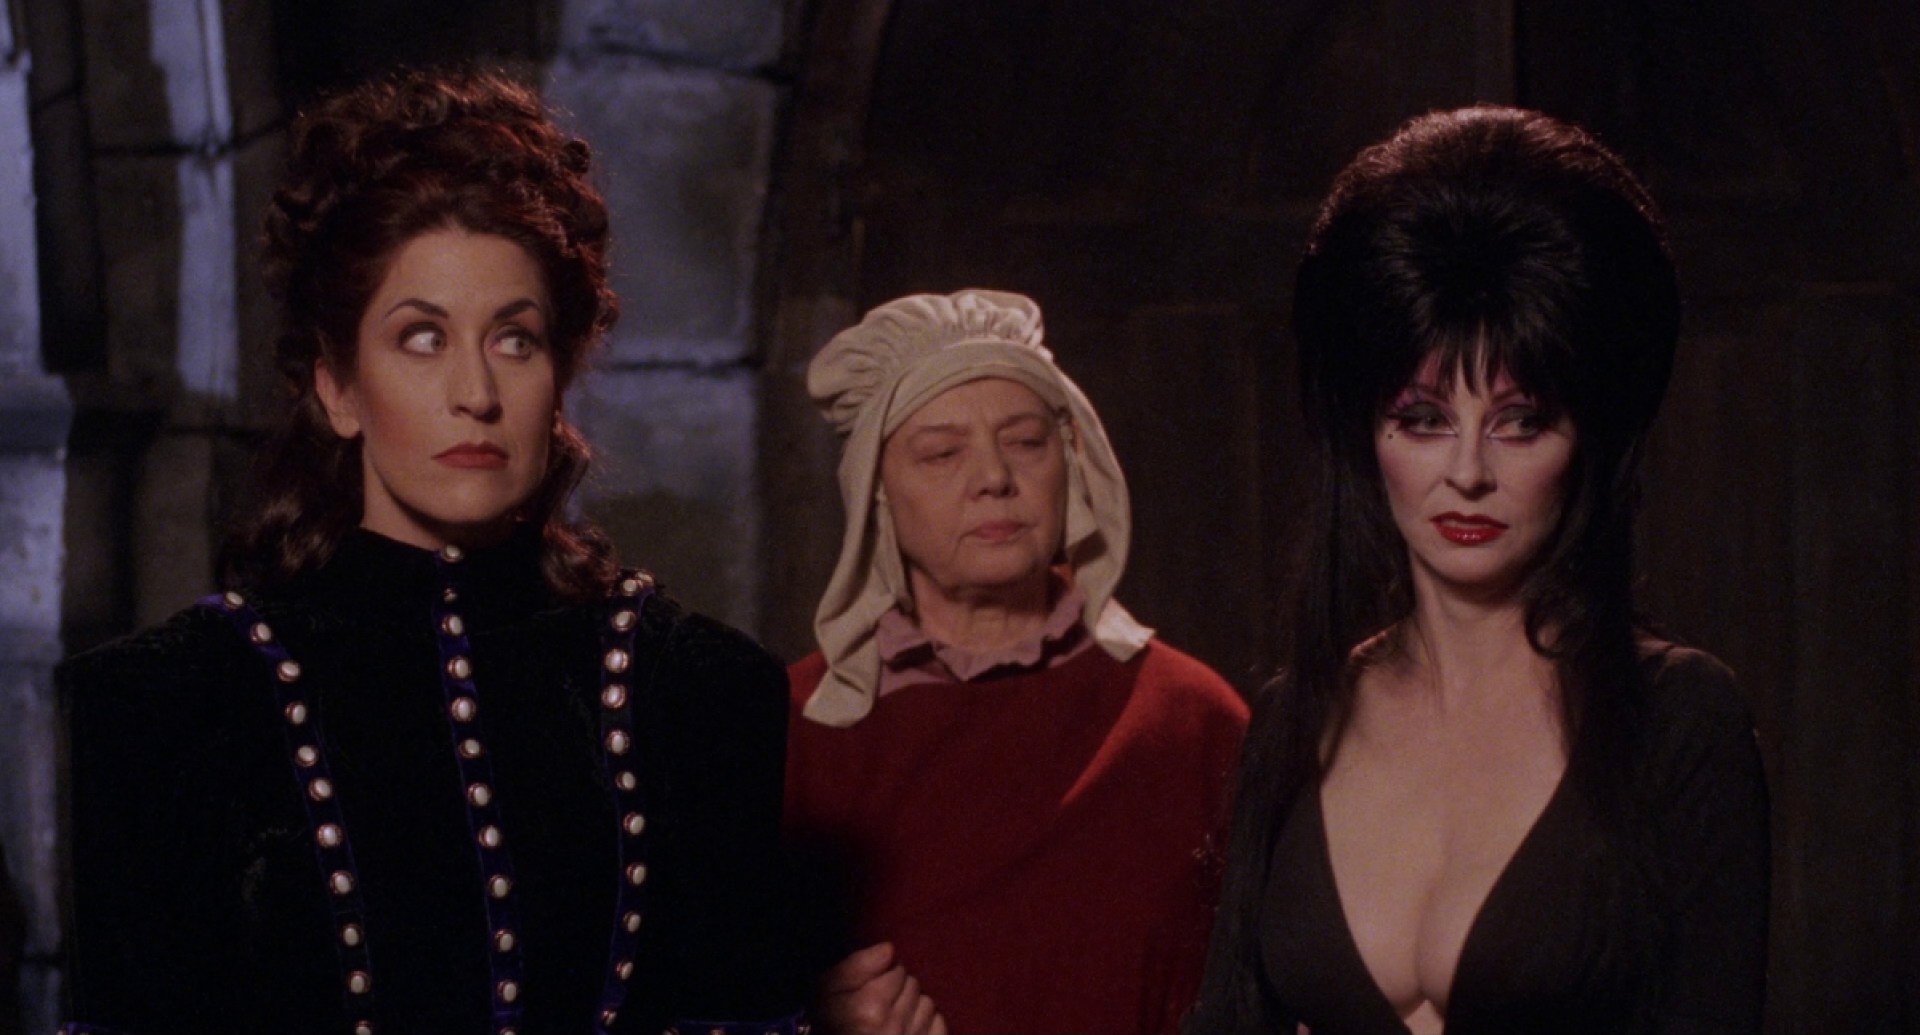 Elvira and other characters in Elvira's Haunted Hills